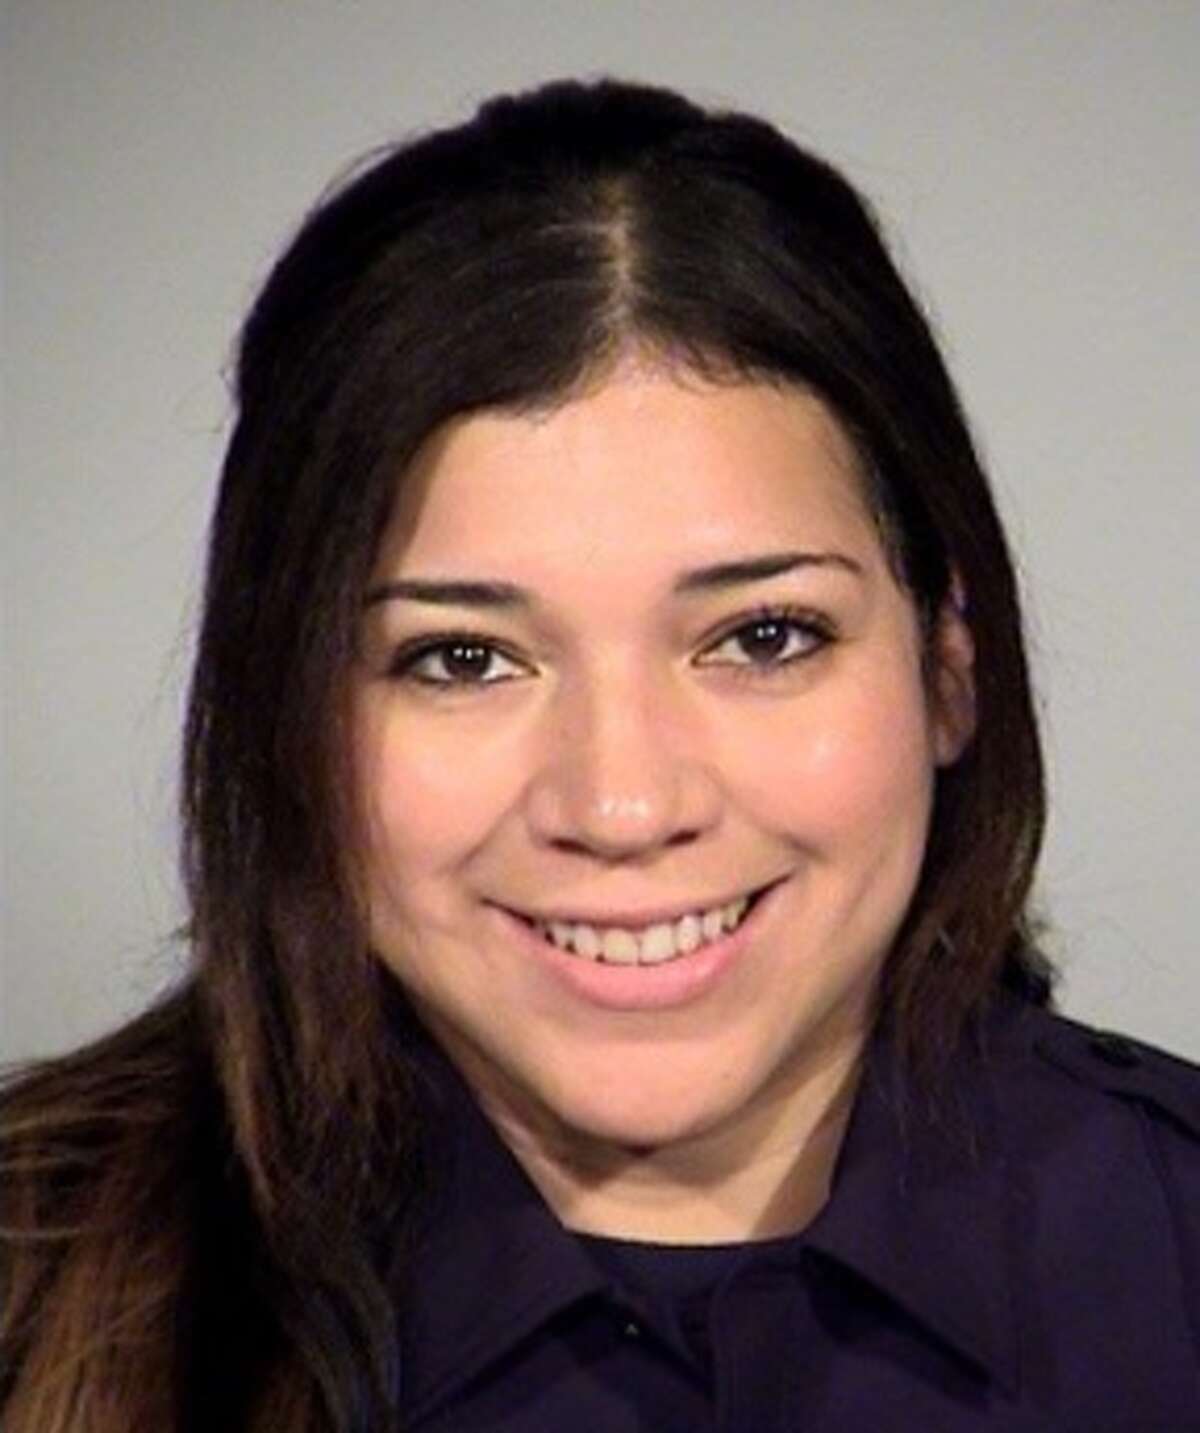 Gena Rodriguez, an 11-year veteran assigned to West Patrol, faces a charge of drunken driving with a child under the age of 15 in the car, a state felony. She remains in the Bexar County Jail on an $8,000 bond.